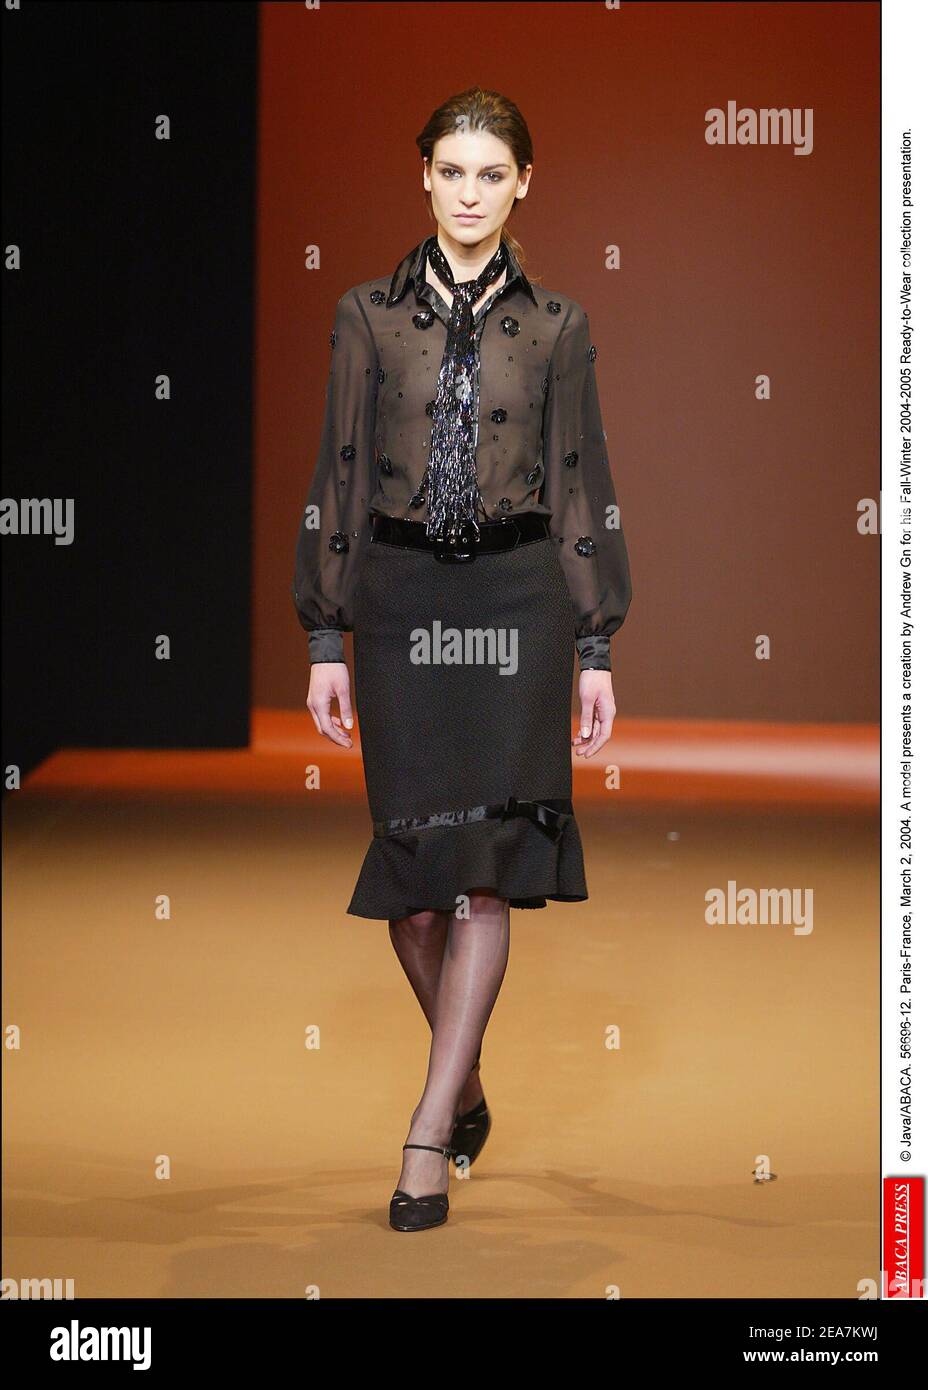 © Java/ABACA. 56696-12. Paris-France, March 2, 2004. A model presents a creation by Andrew Gn for his Fall-Winter 2004-2005 Ready-to-Wear collection presentation. Stock Photo